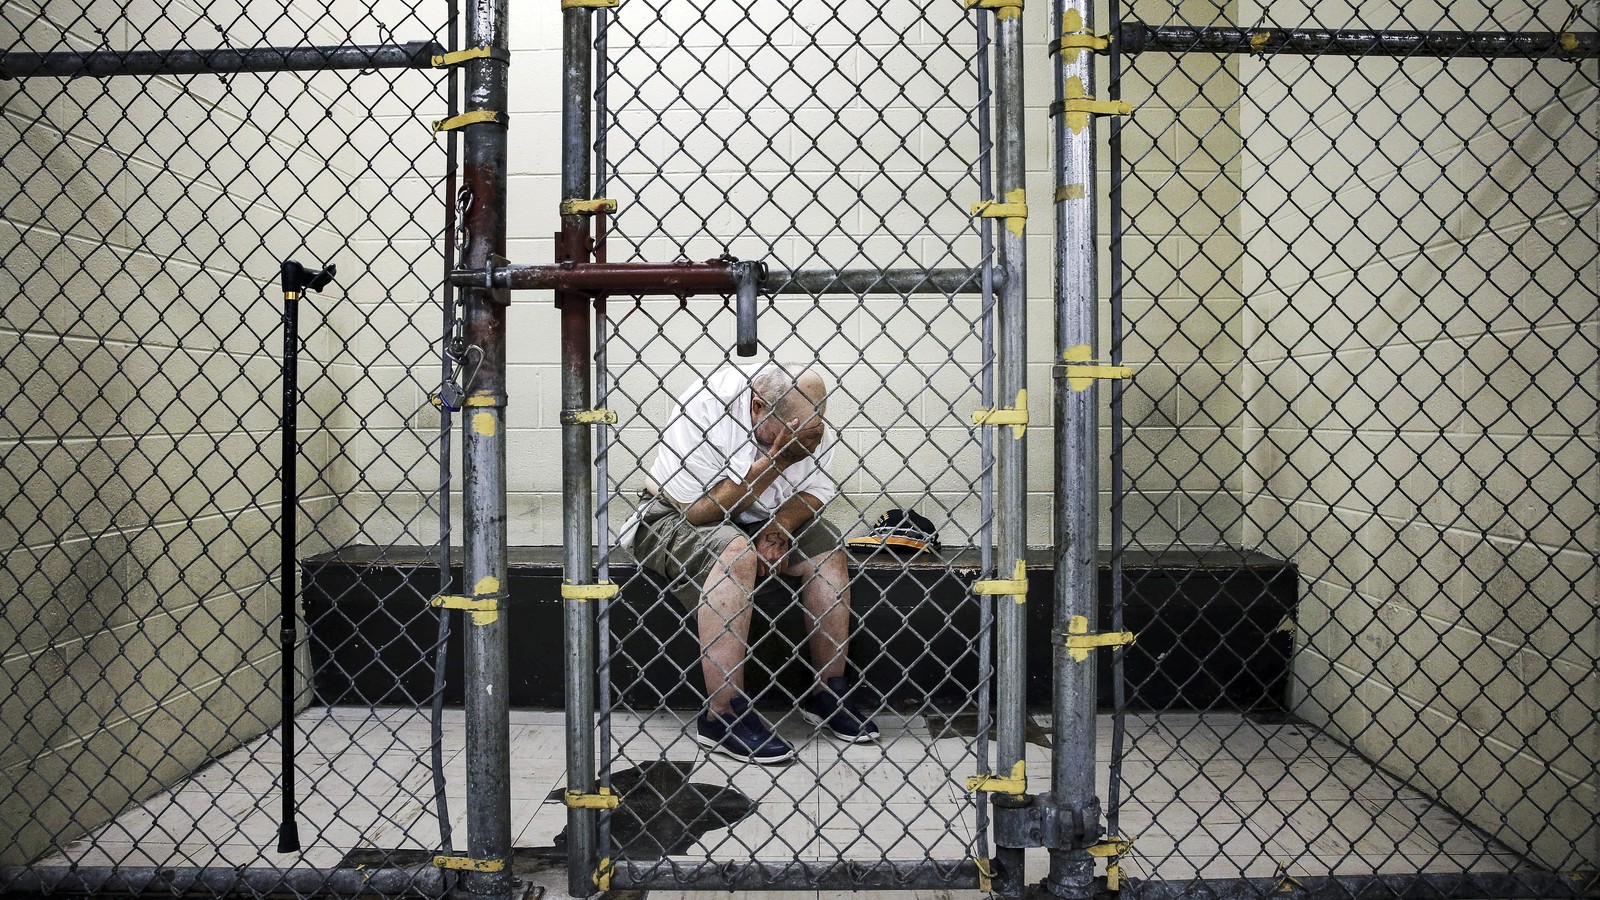 America's Largest Mental Hospital Is a Jail - The Atlantic